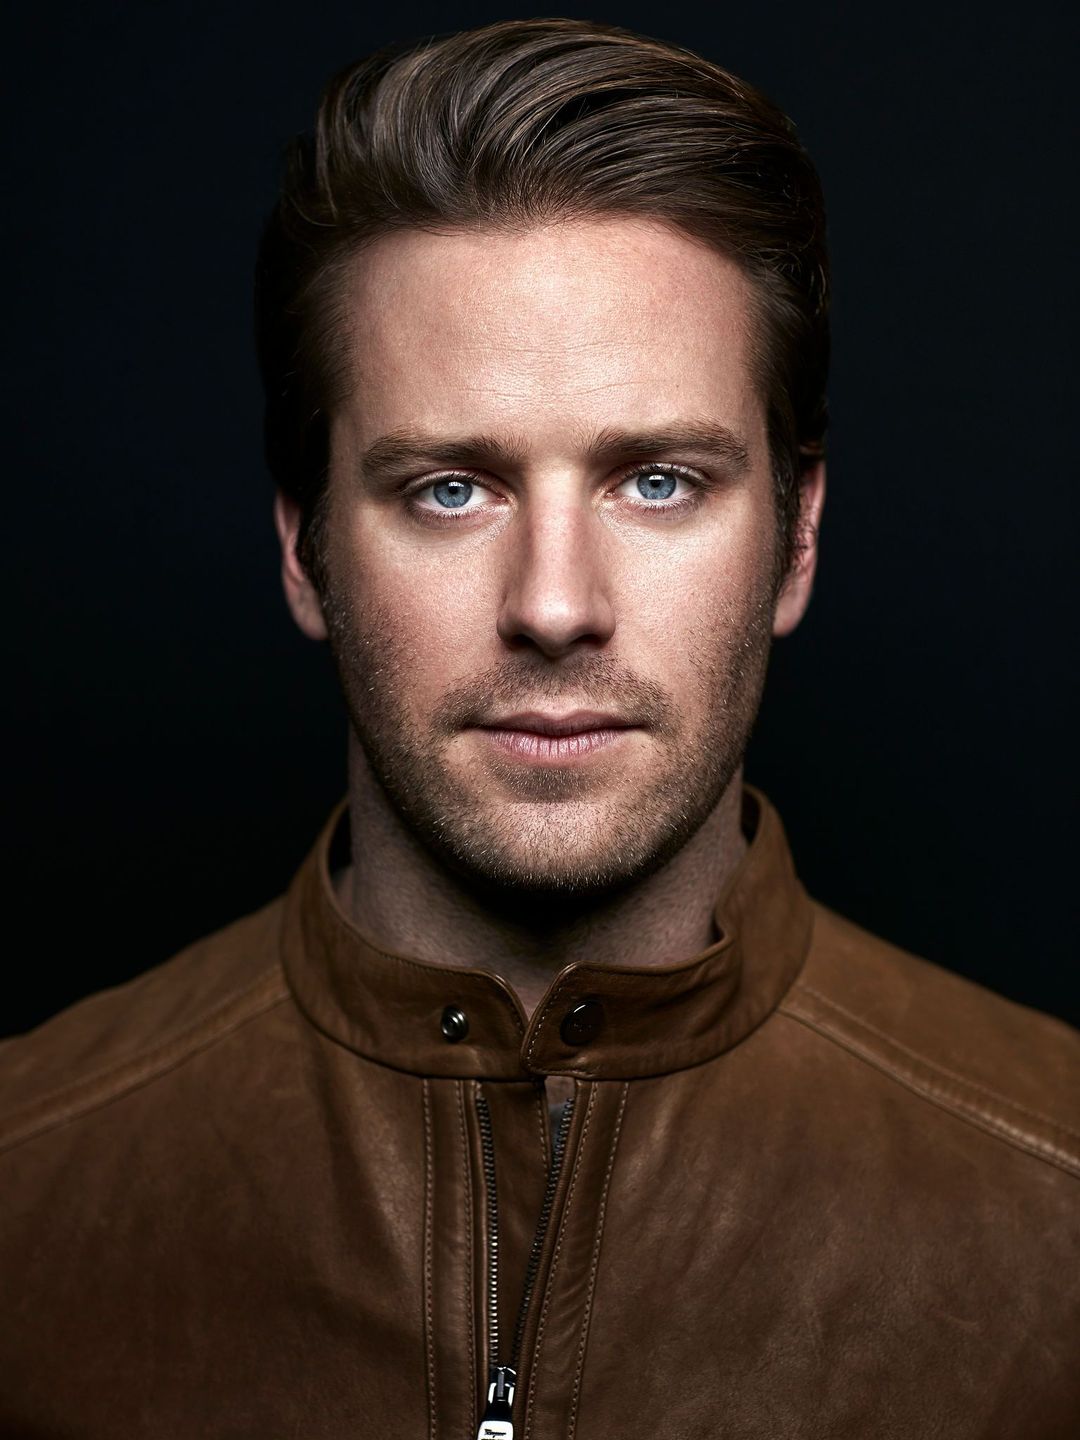 Armie Hammer does he have a wife